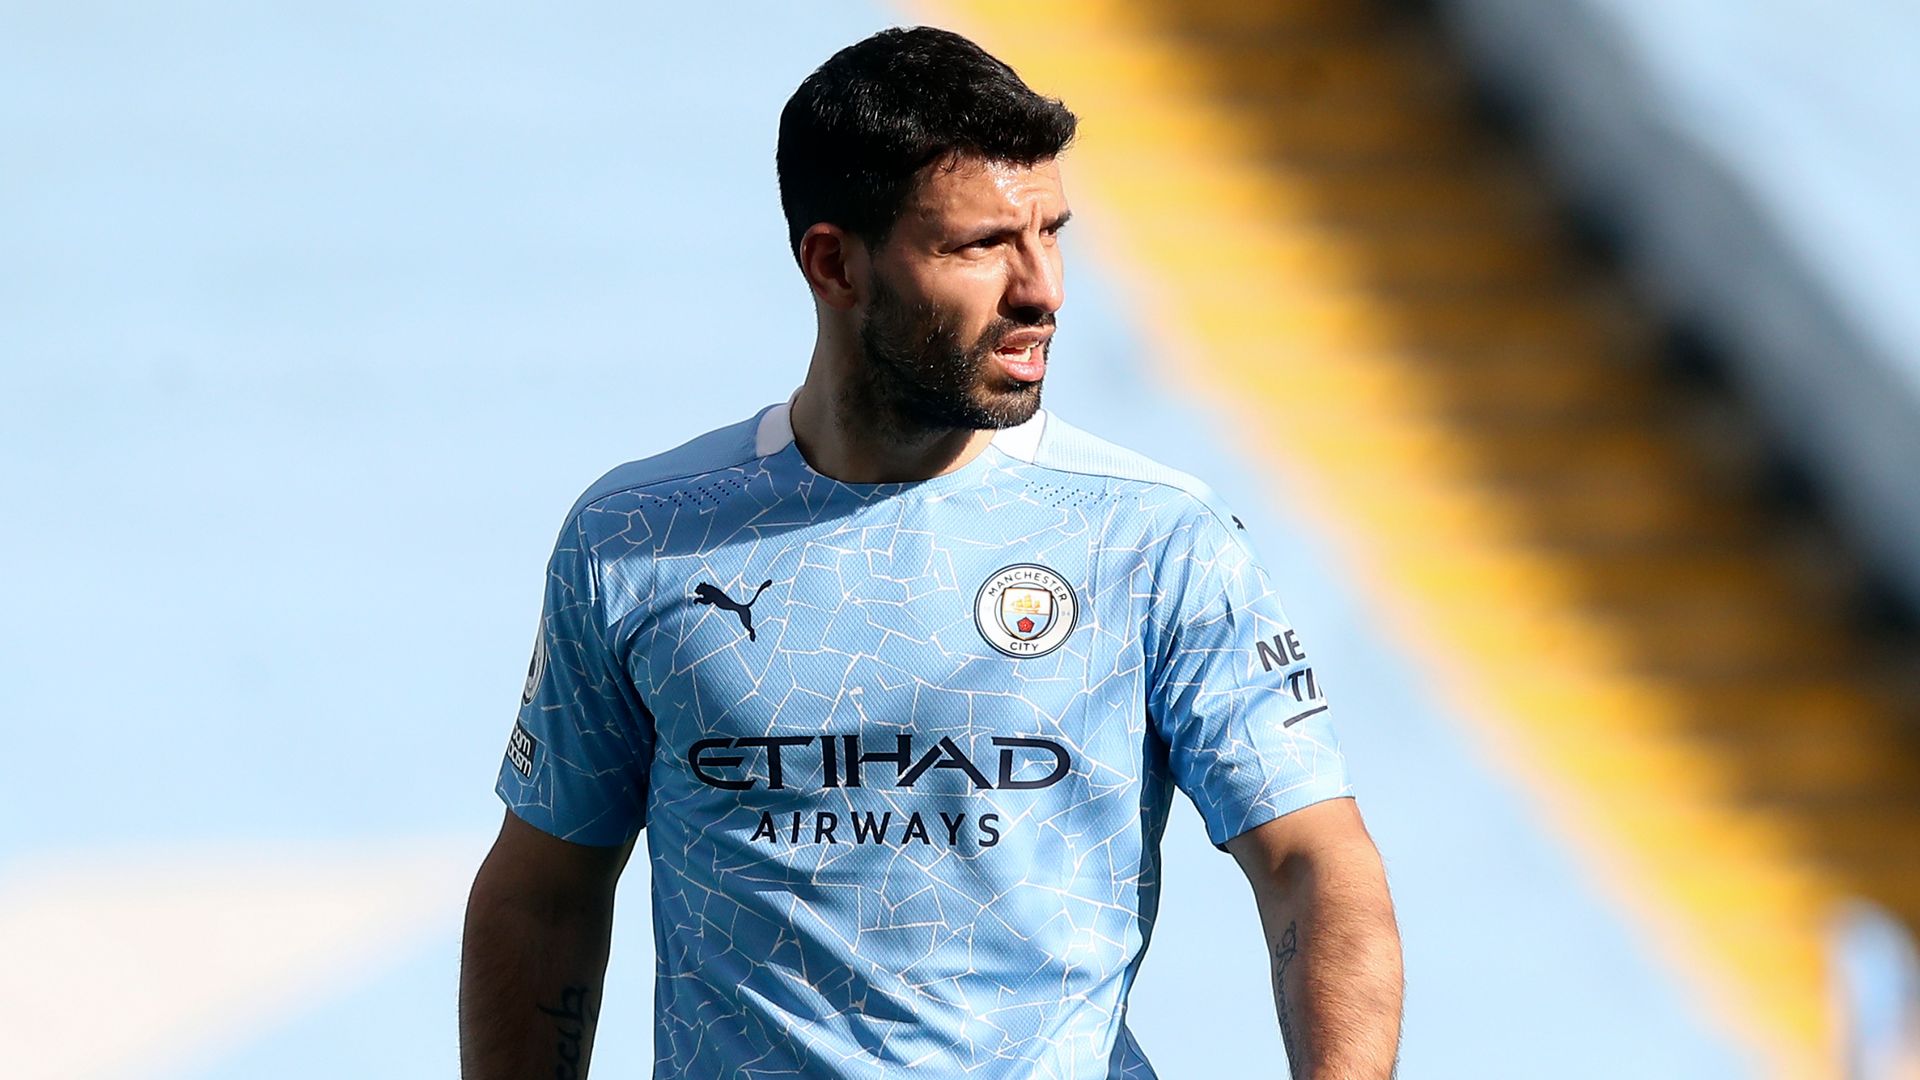 Fulham vs Man City preview: Starts for Aguero, Sterling?